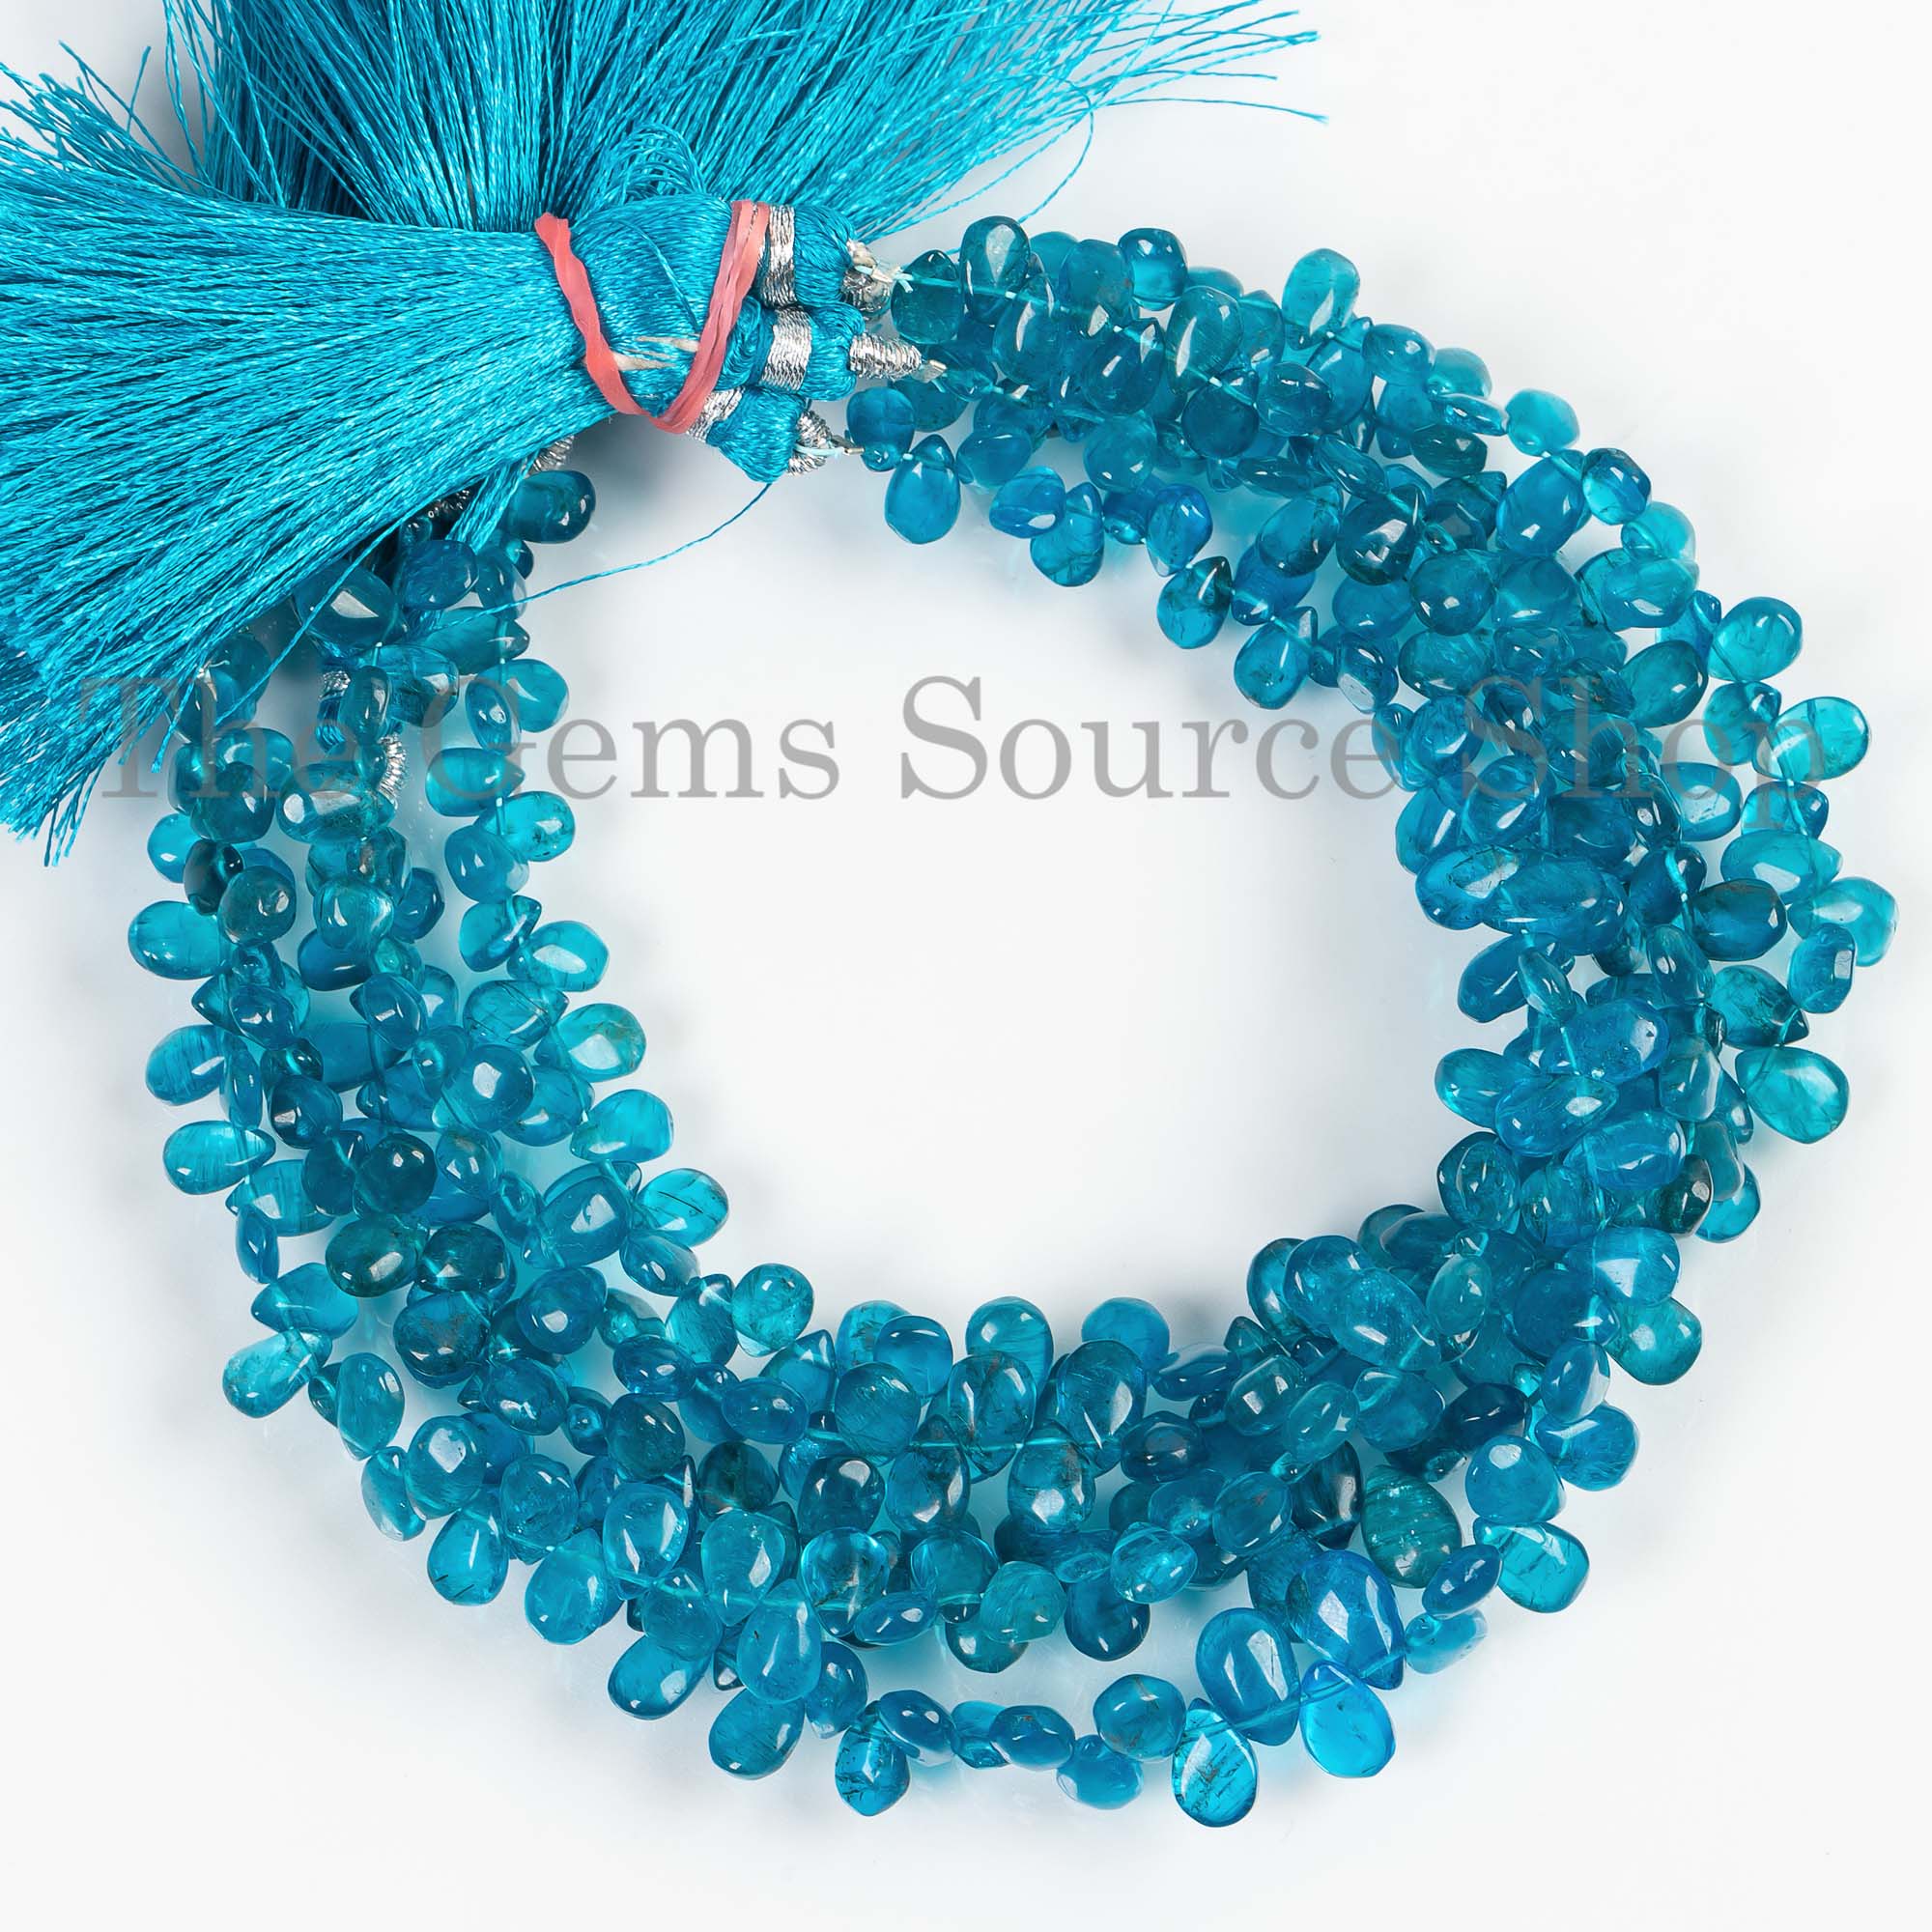 Top Quality Neon Apatite Pear Briolette, 4x6.5-5.5x9mm Neon Apatite Beads, Smooth Beads, Pear Beads, Apatite Drop Beads, Beads Jewelry